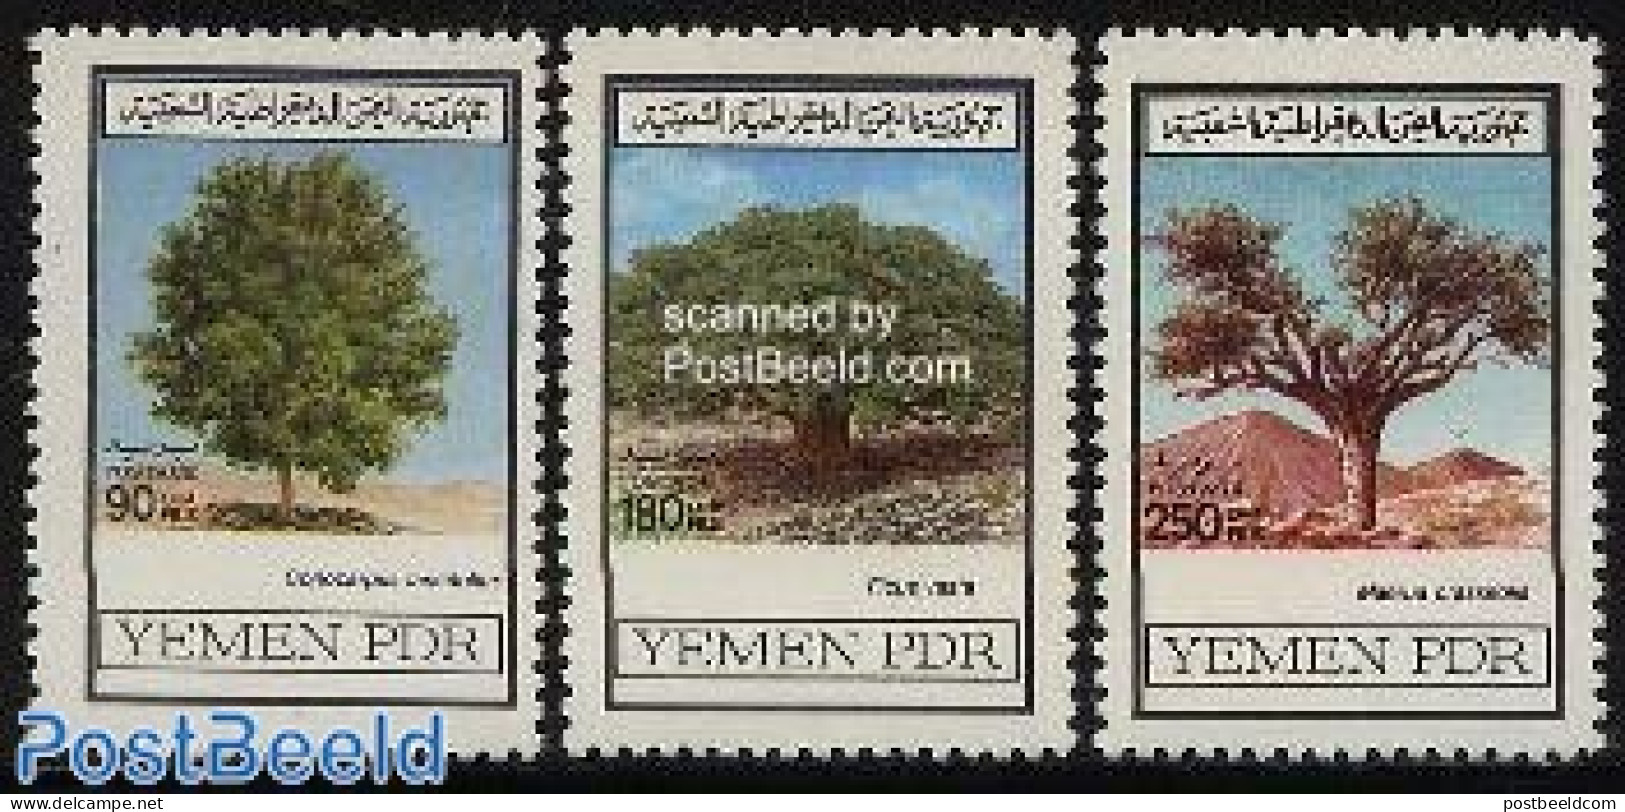 Yemen, South 1981 Trees 3v, Mint NH, Nature - Trees & Forests - Rotary Club